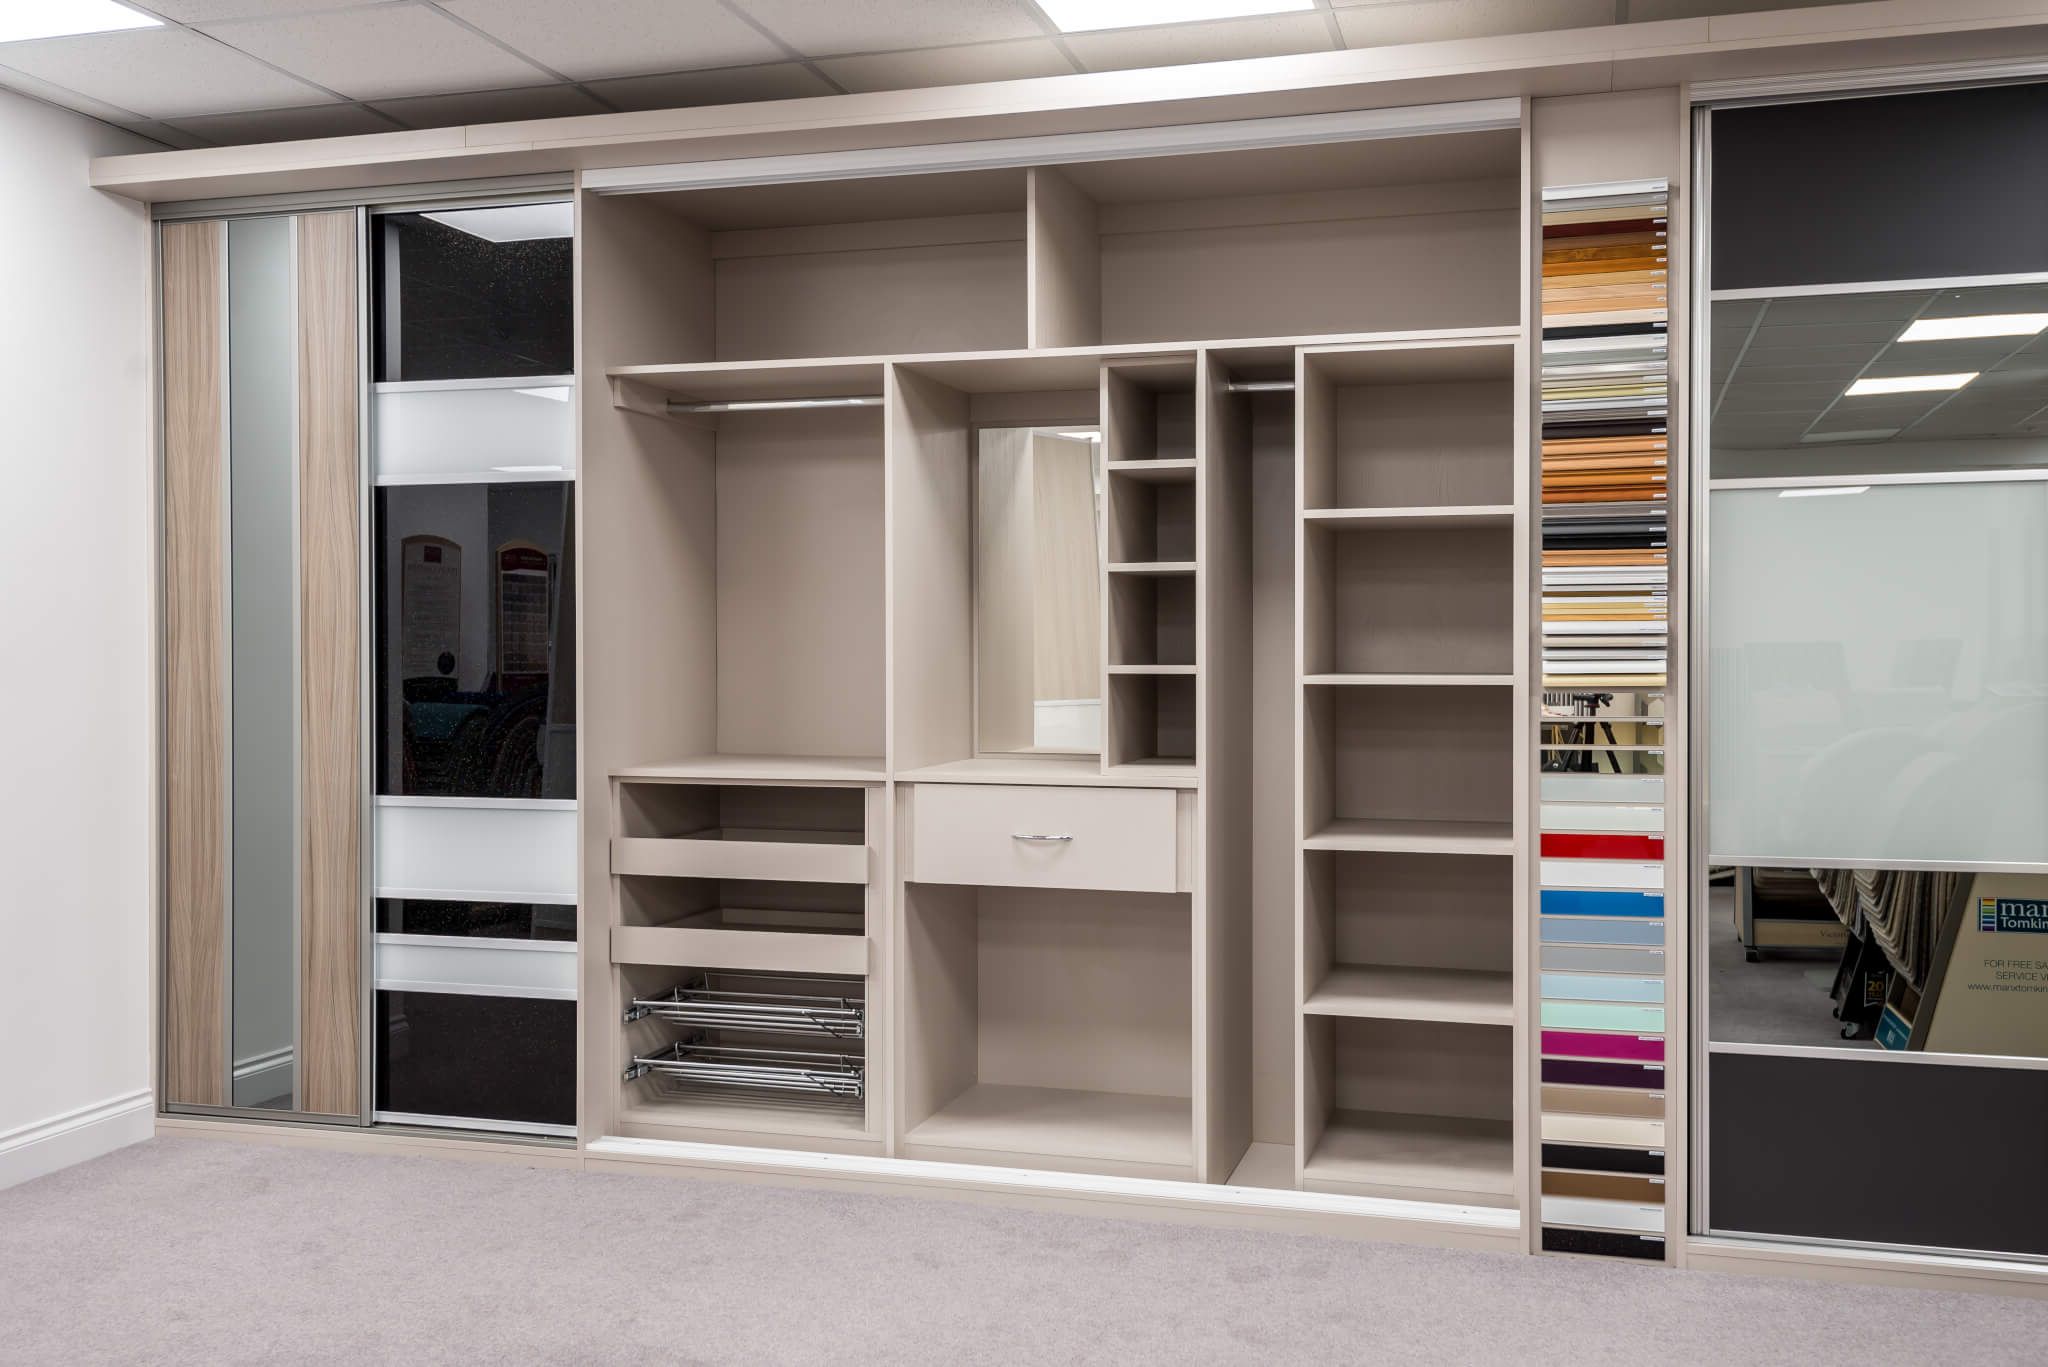 Designing The Perfect Fitted Wardrobe: Shelves Vs Drawers Vs Hanging Space  (which Is Best)? | Millers Regarding Single Wardrobes With Drawers And Shelves (View 13 of 20)